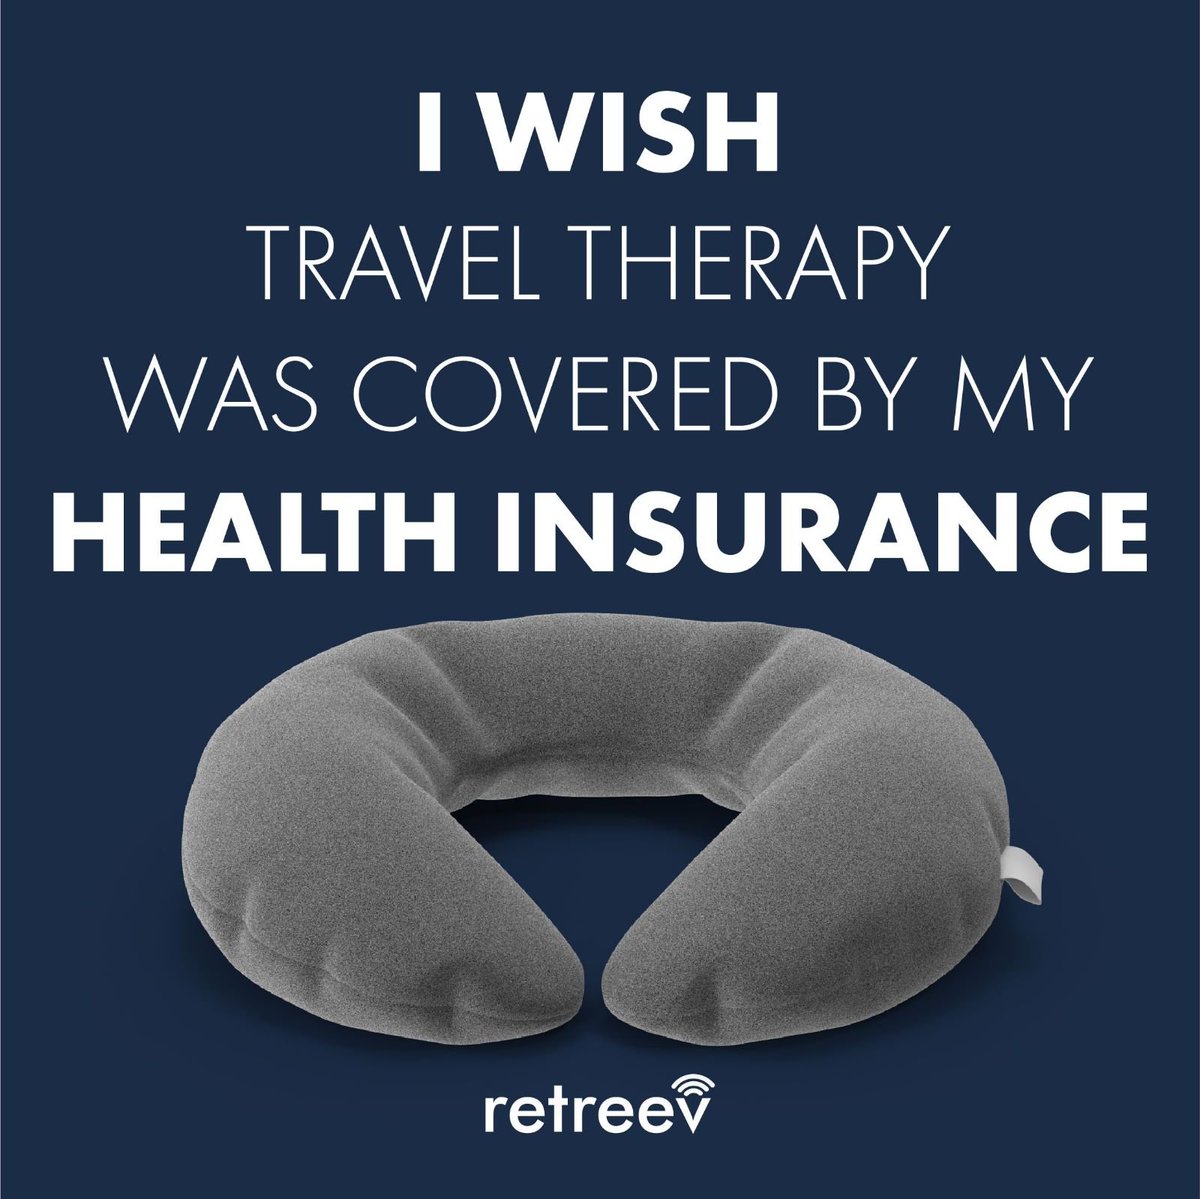 the one insurance we can't take out! the one we'd be happy to pay for! 

#retreev #retreevme #retreevtag #smarttag #tapme #scanme #lostandfound #lostluggage #lostluggagesolutions #lostproperty #livesmart #smartliving #traveltips #creativethinking #connectingpeople #connections #b